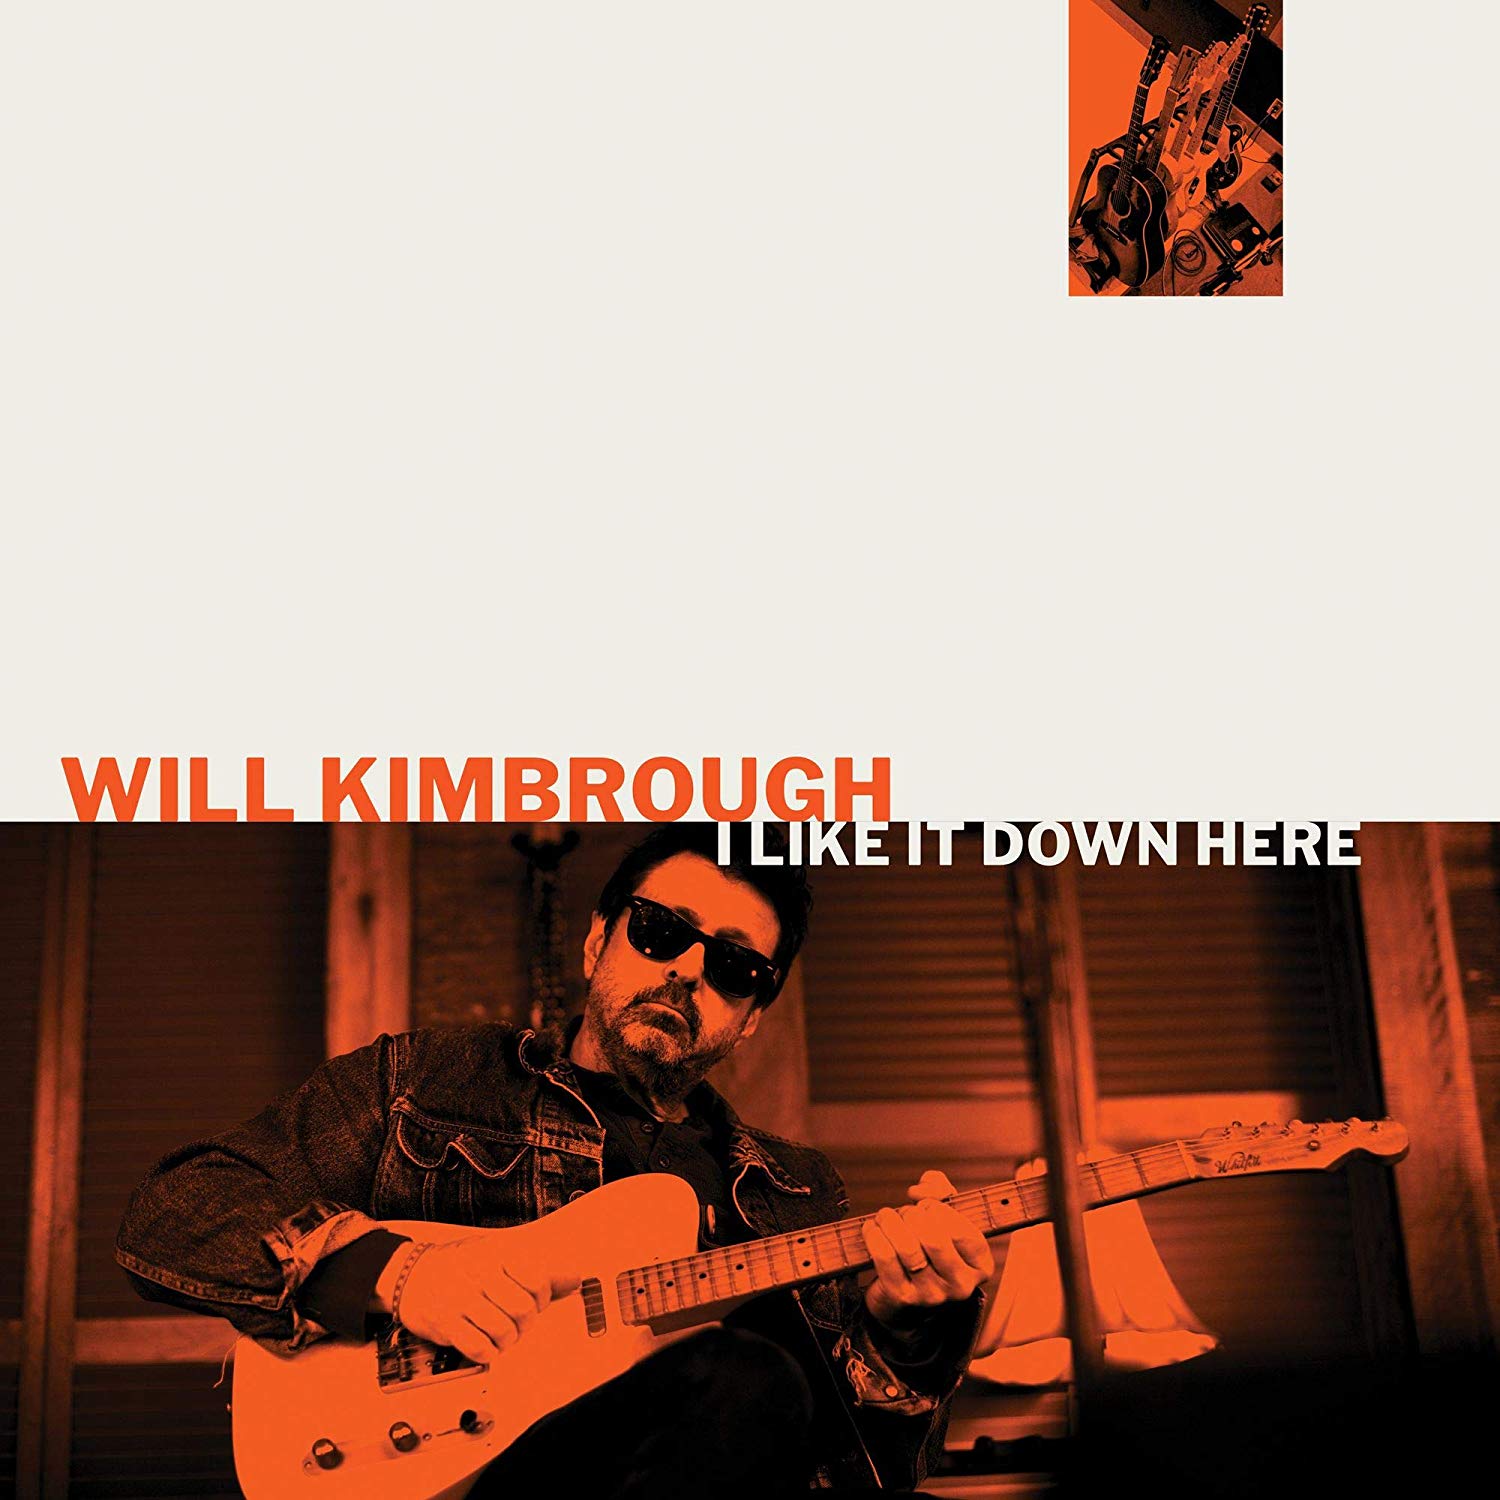 Will Kimbrough – I Like It Down Here (cover art)